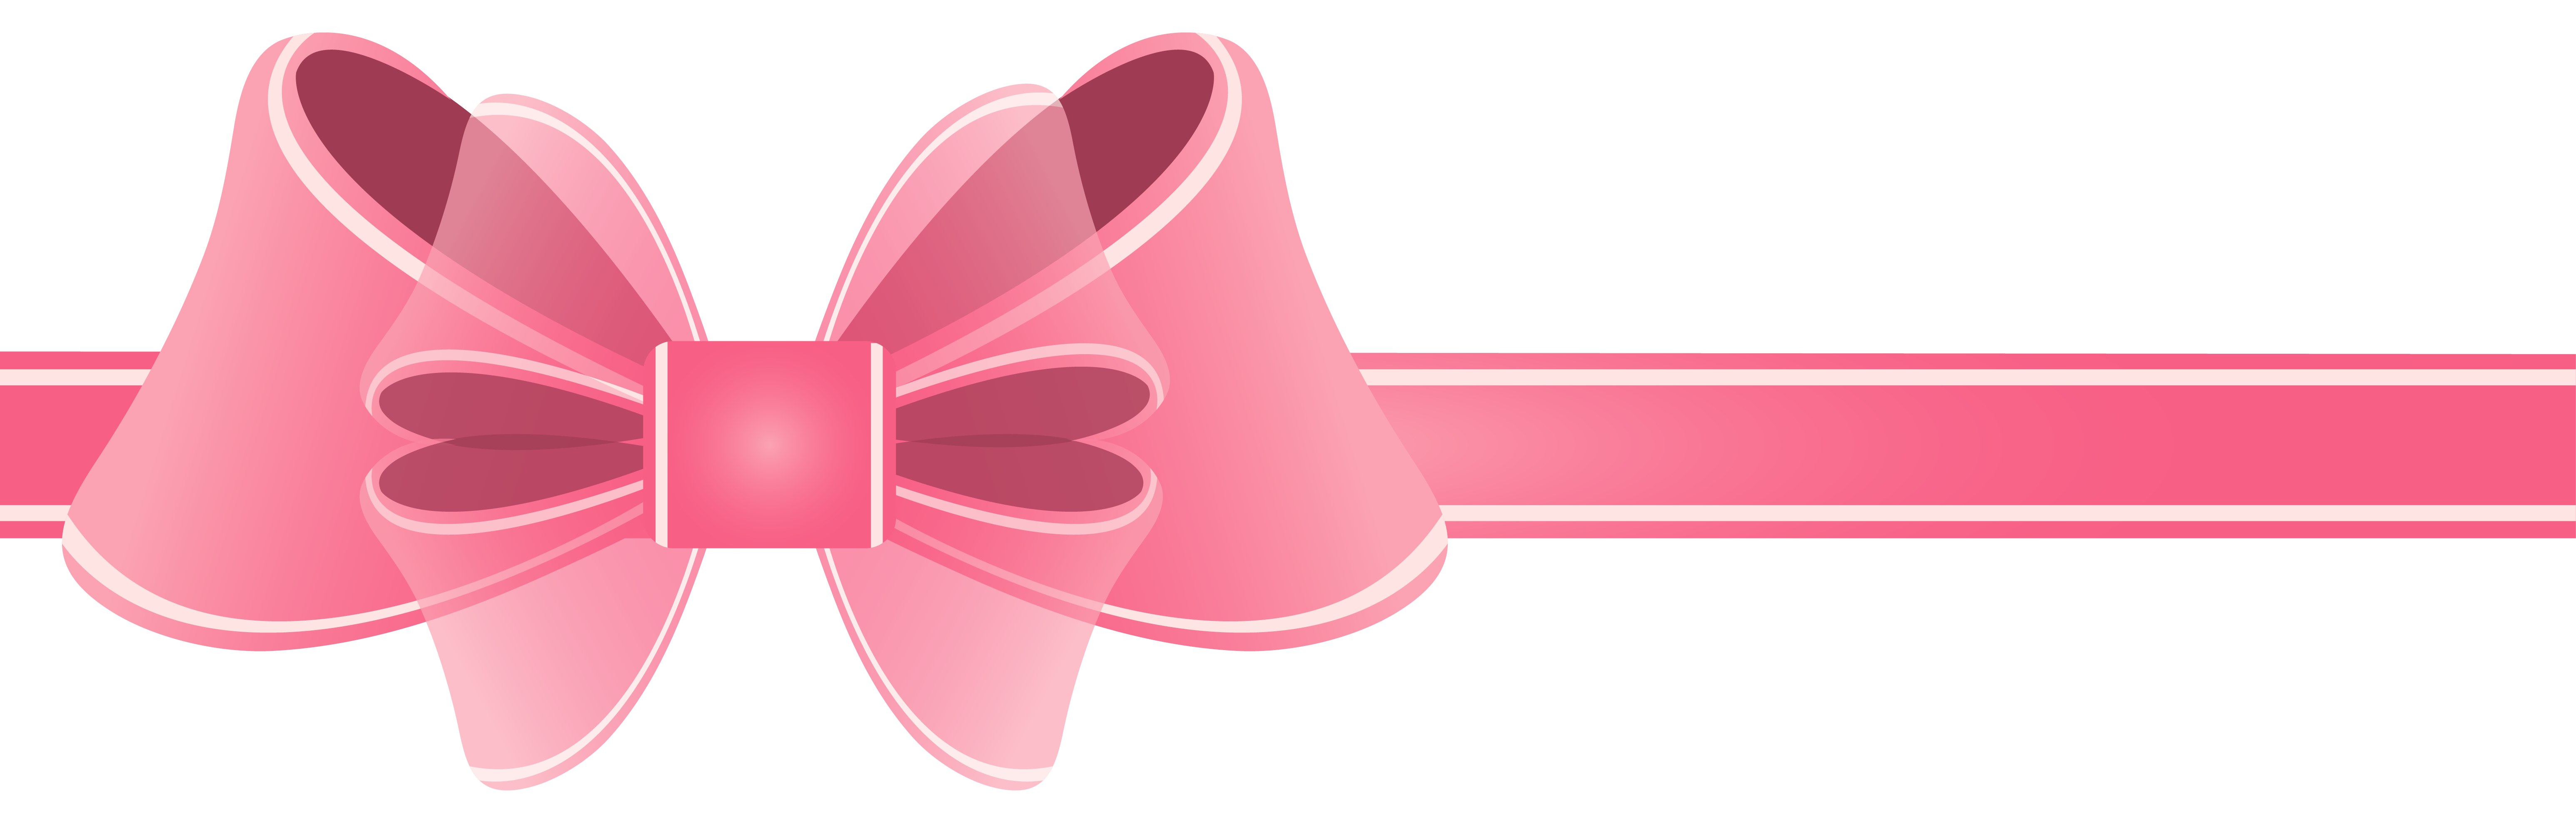 Cute Bow PNG HD - 122305